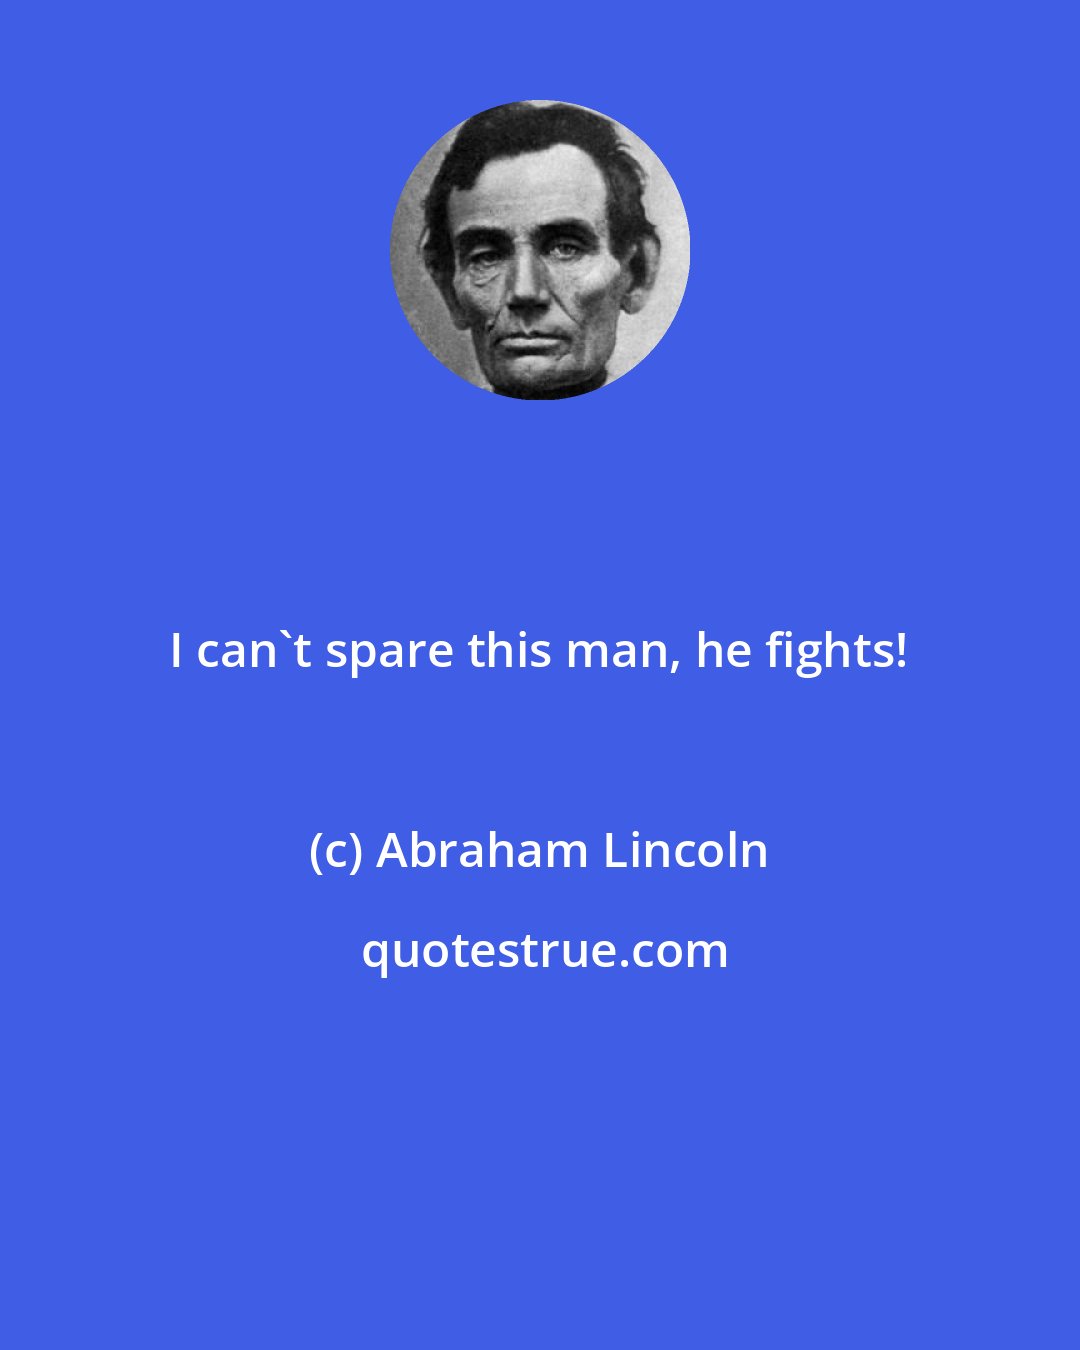 Abraham Lincoln: I can't spare this man, he fights!